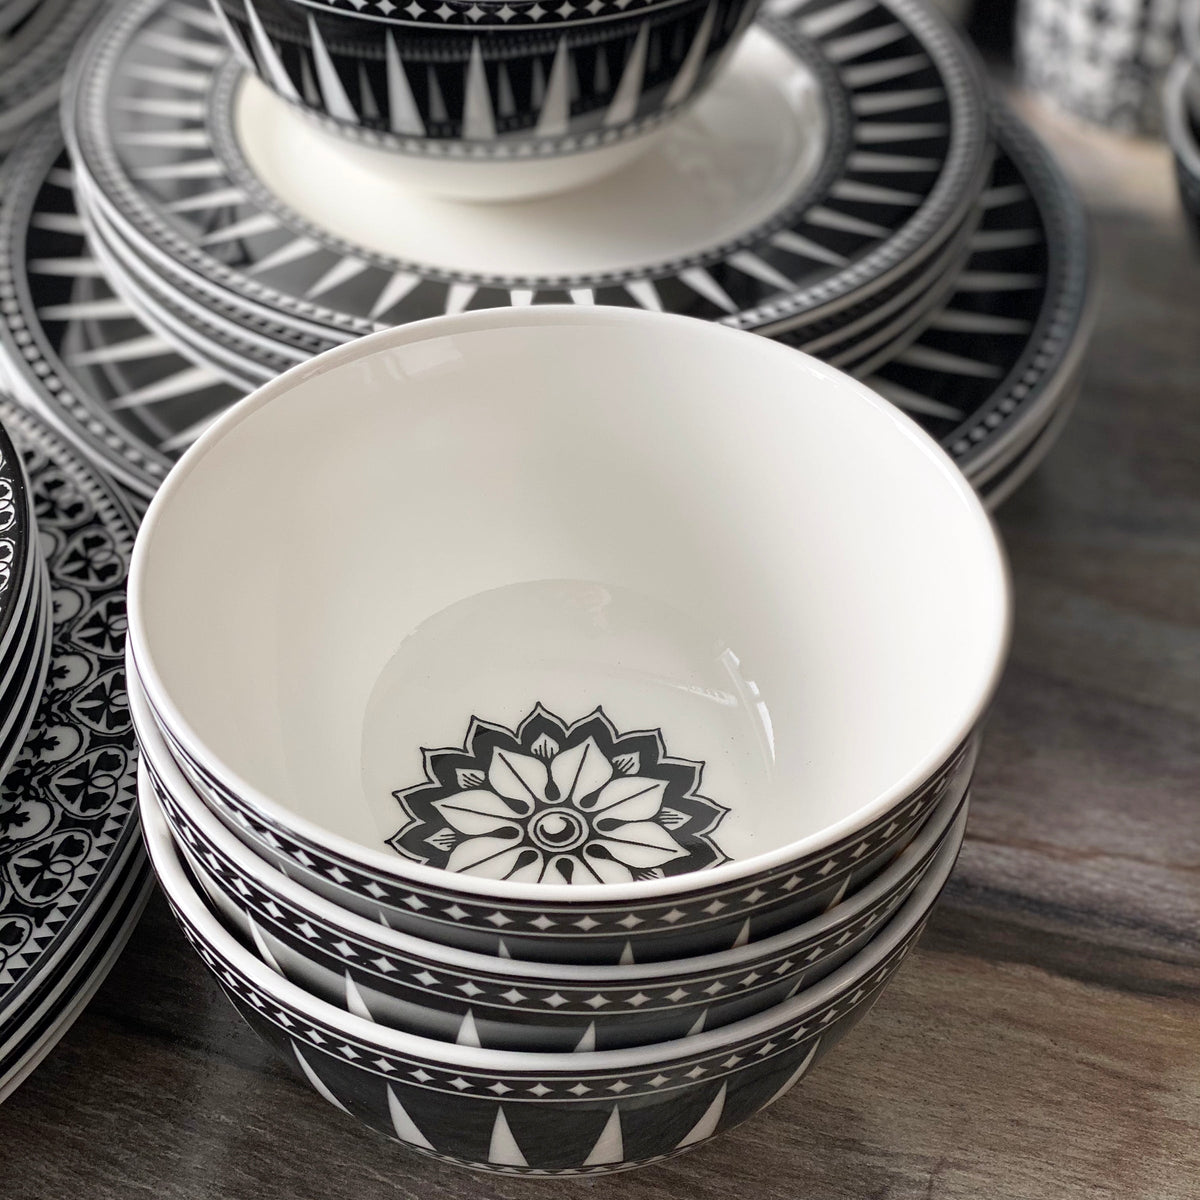 A Geometrics Collection 60 Pc. Set of black and white plates and bowls by Caskata Artisanal Home on a table.